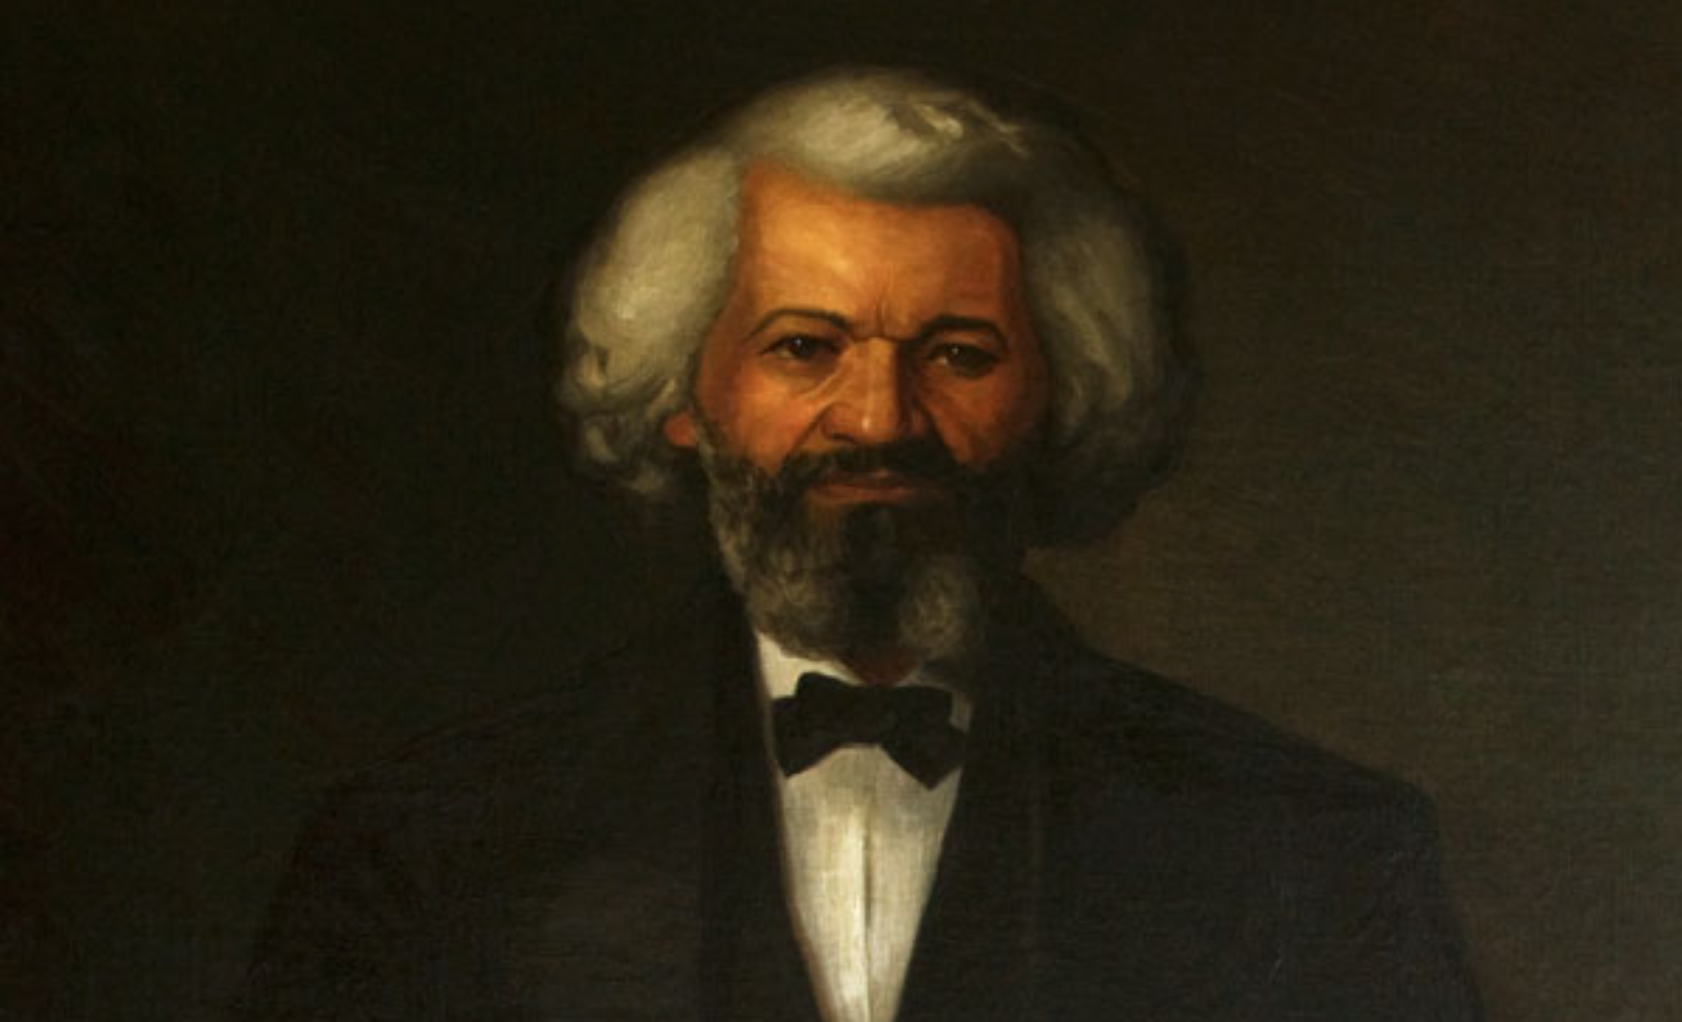 Celebrating Frederick Douglass on July 4th is logical.